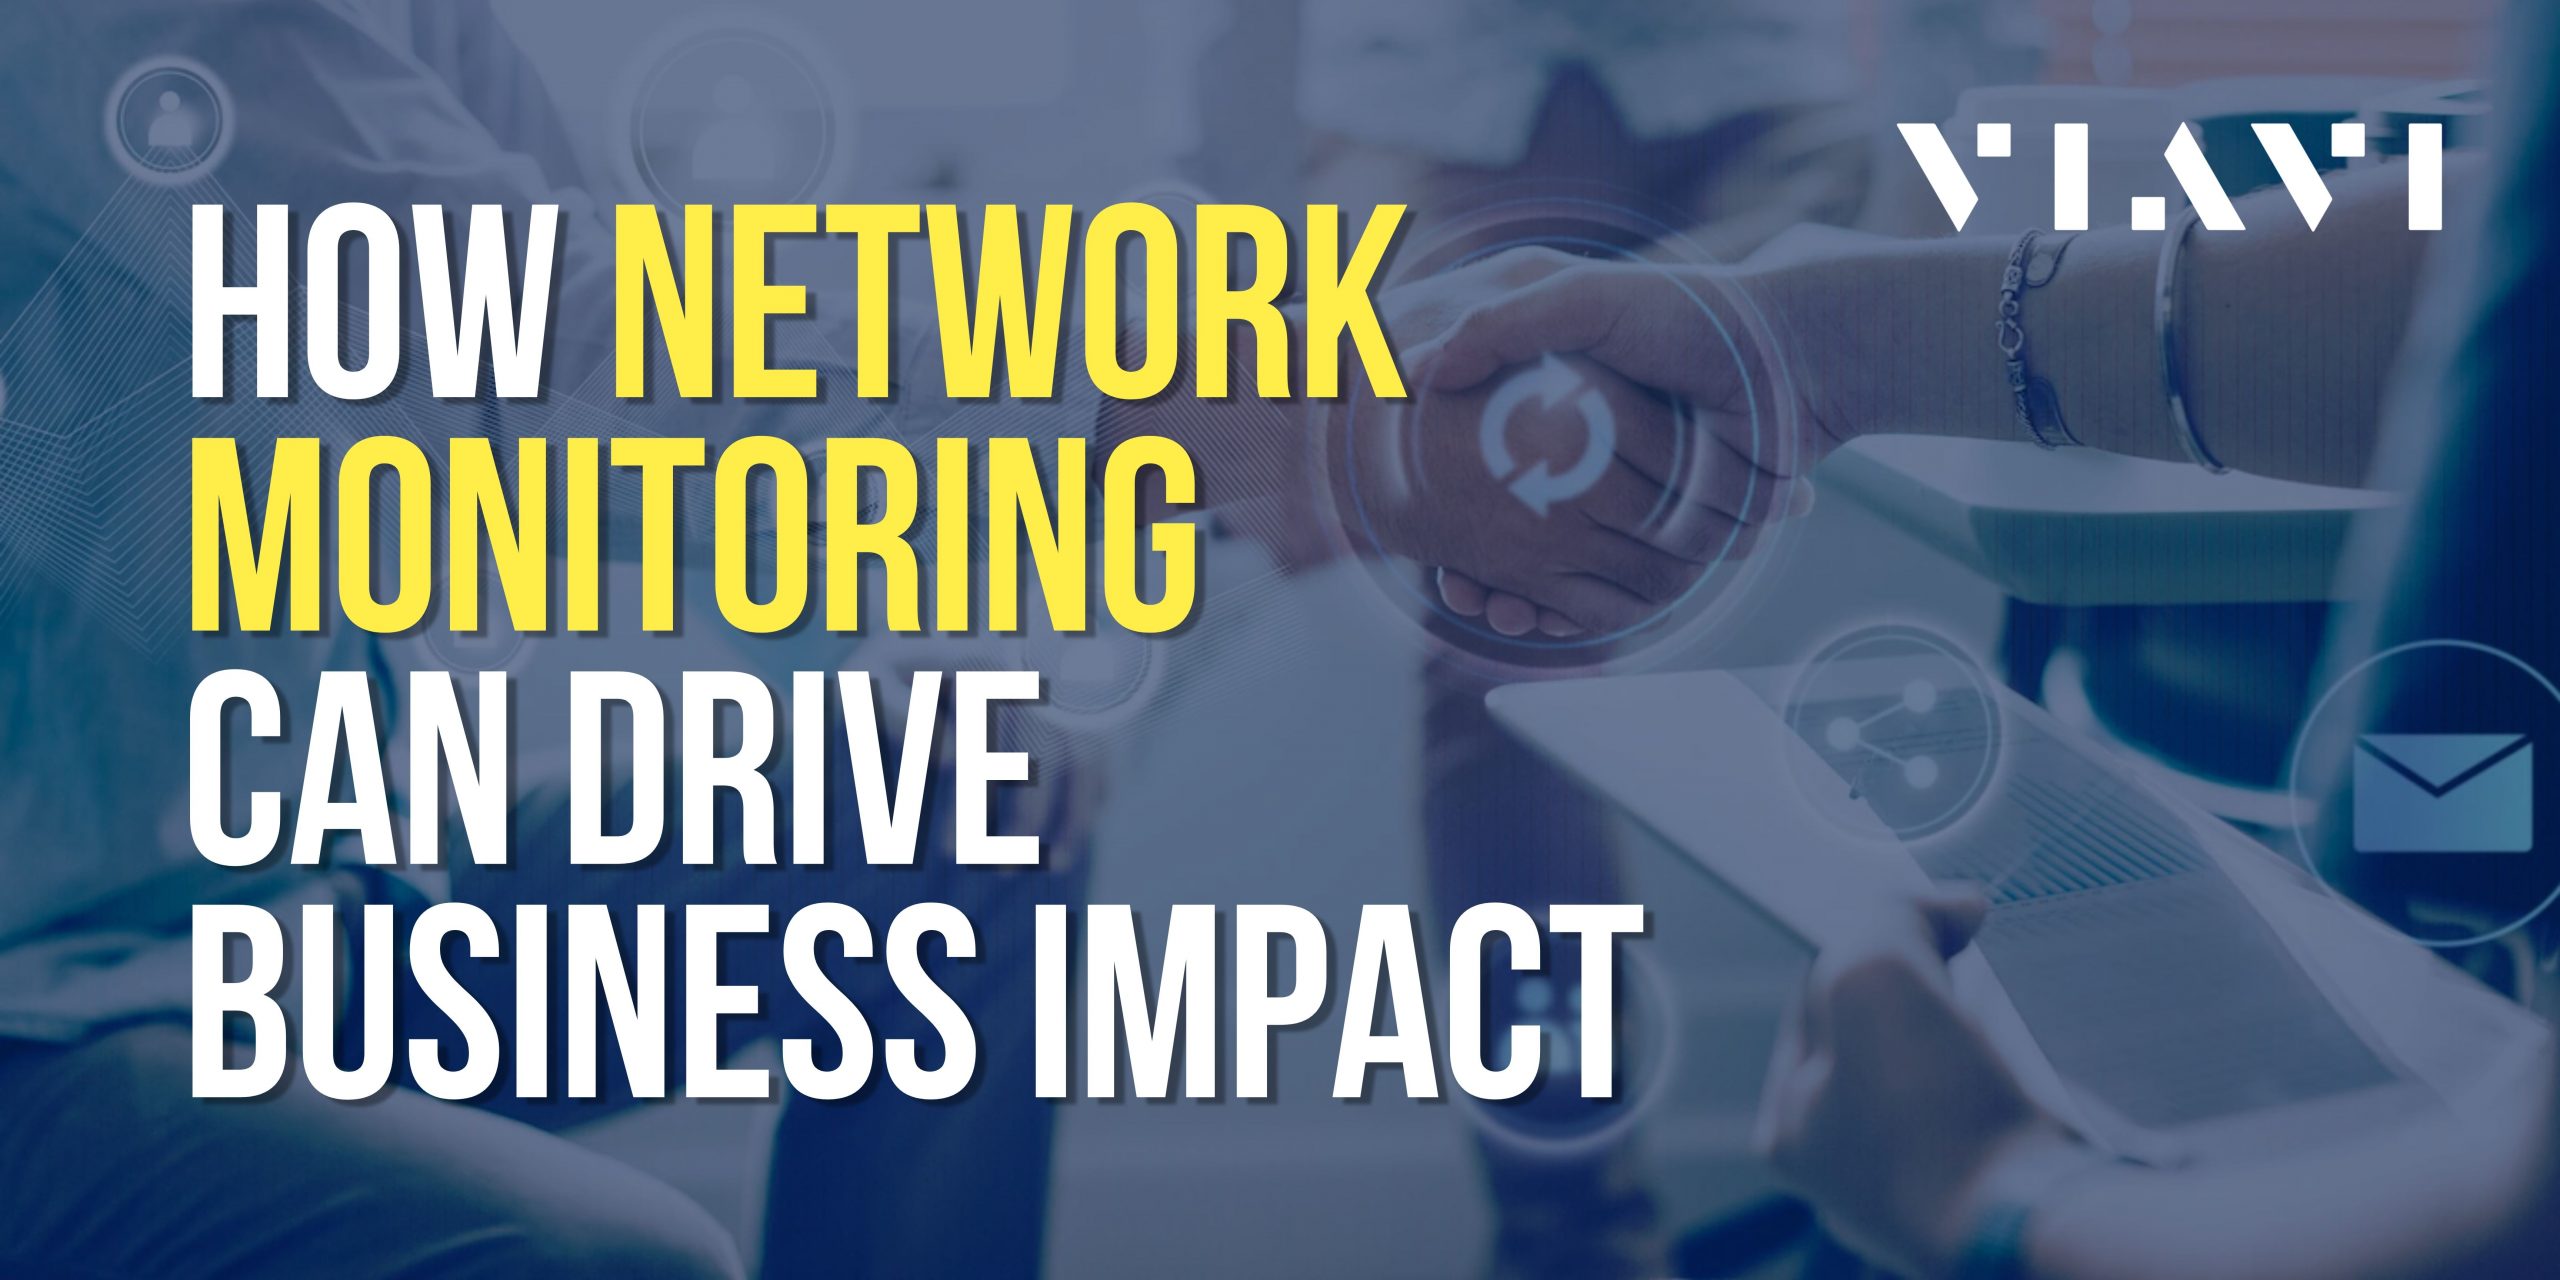 How Network Monitoring Can Drive Business Impact